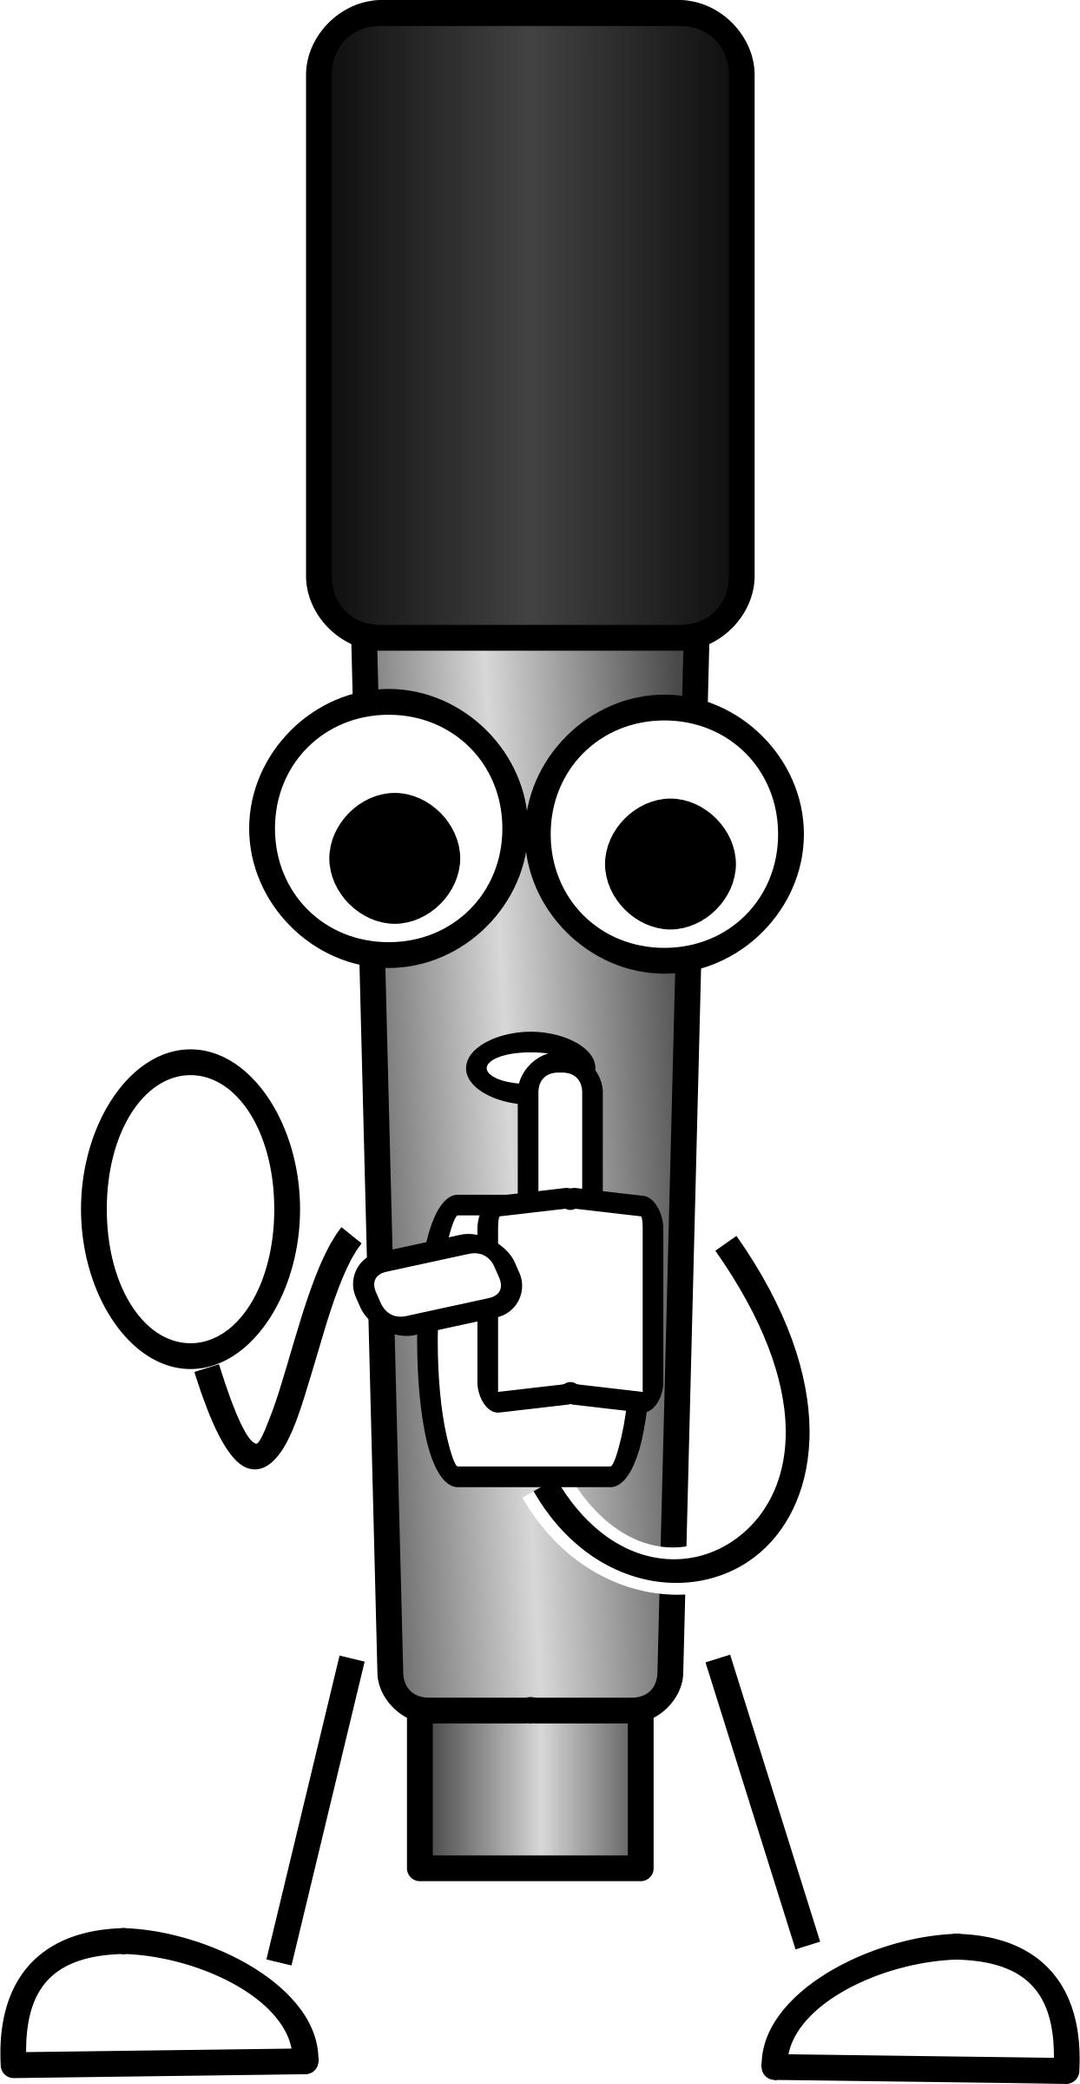 Mike the Mic going "Shhh" png transparent